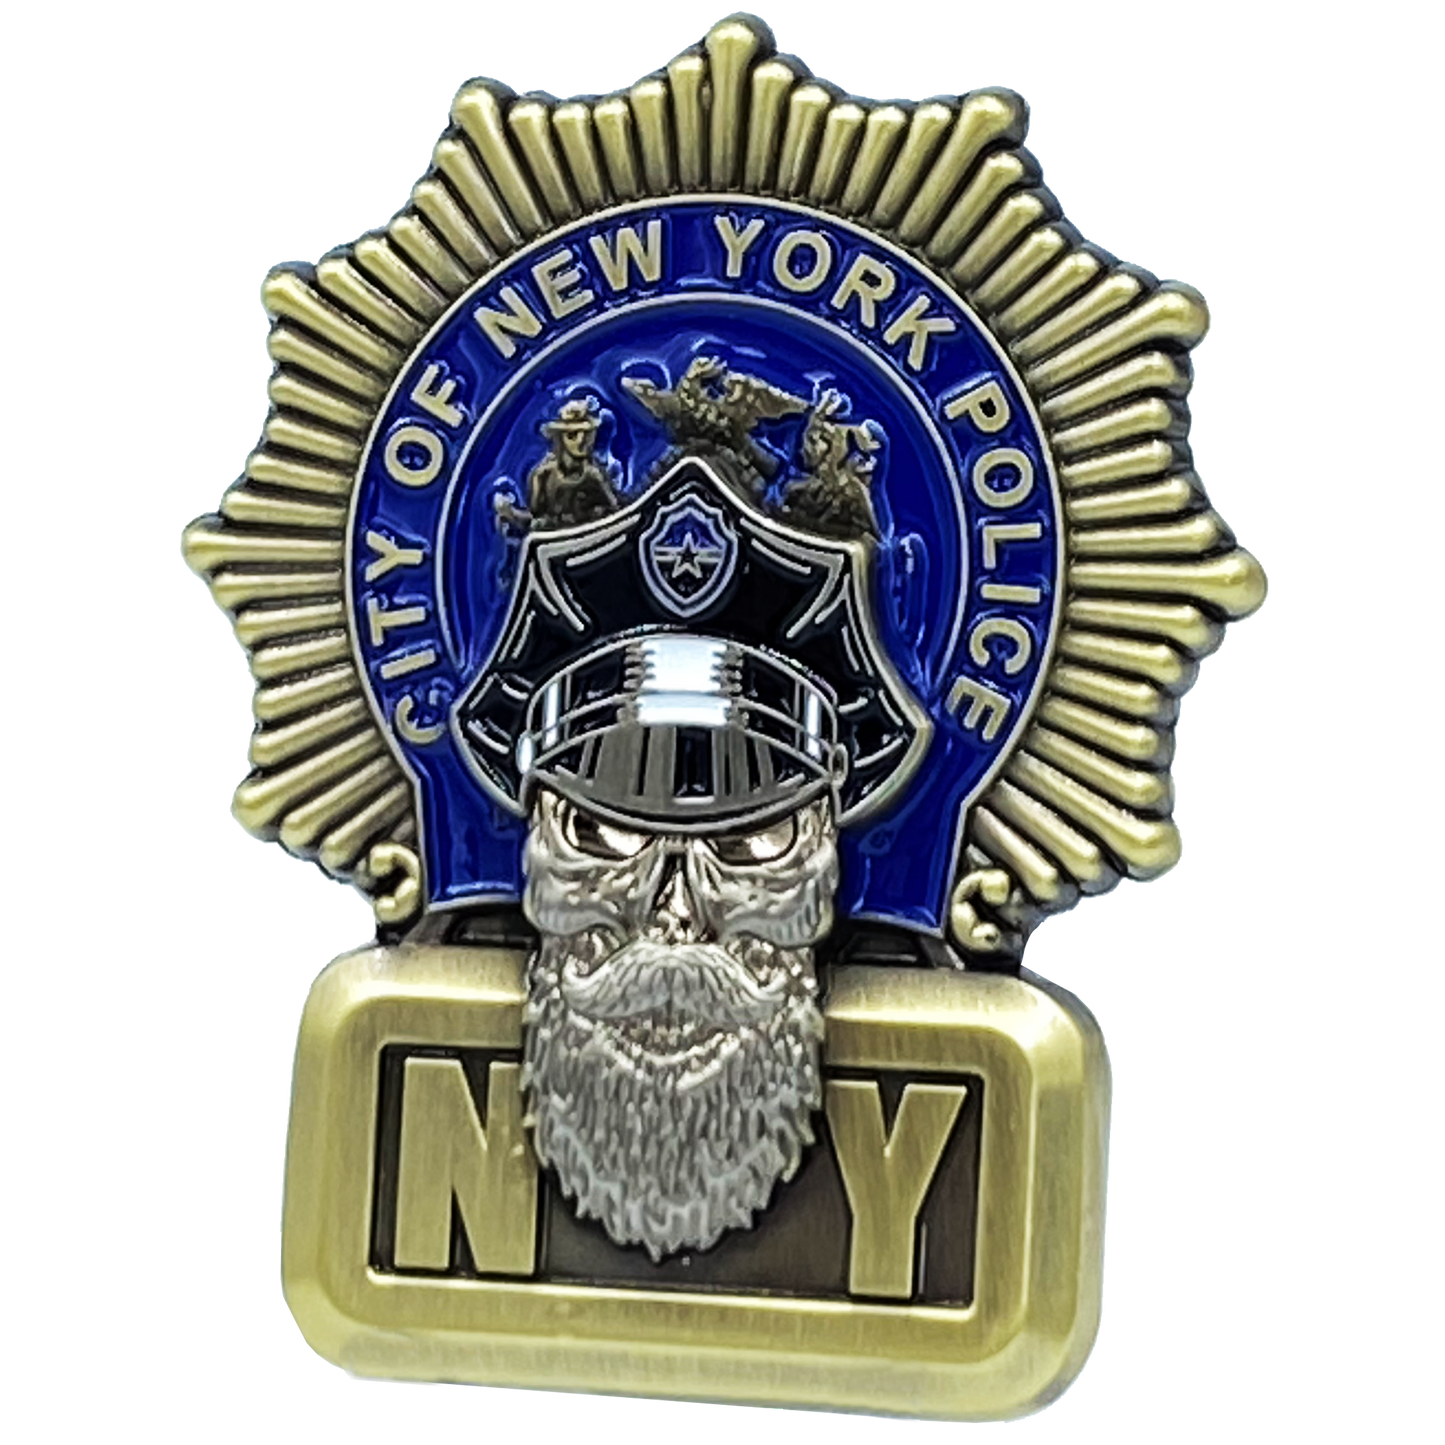 EL1-013 NYPD Detective Beard Gang Skull Challenge Coin Thin Blue Line Back the Blue New York City Police Department